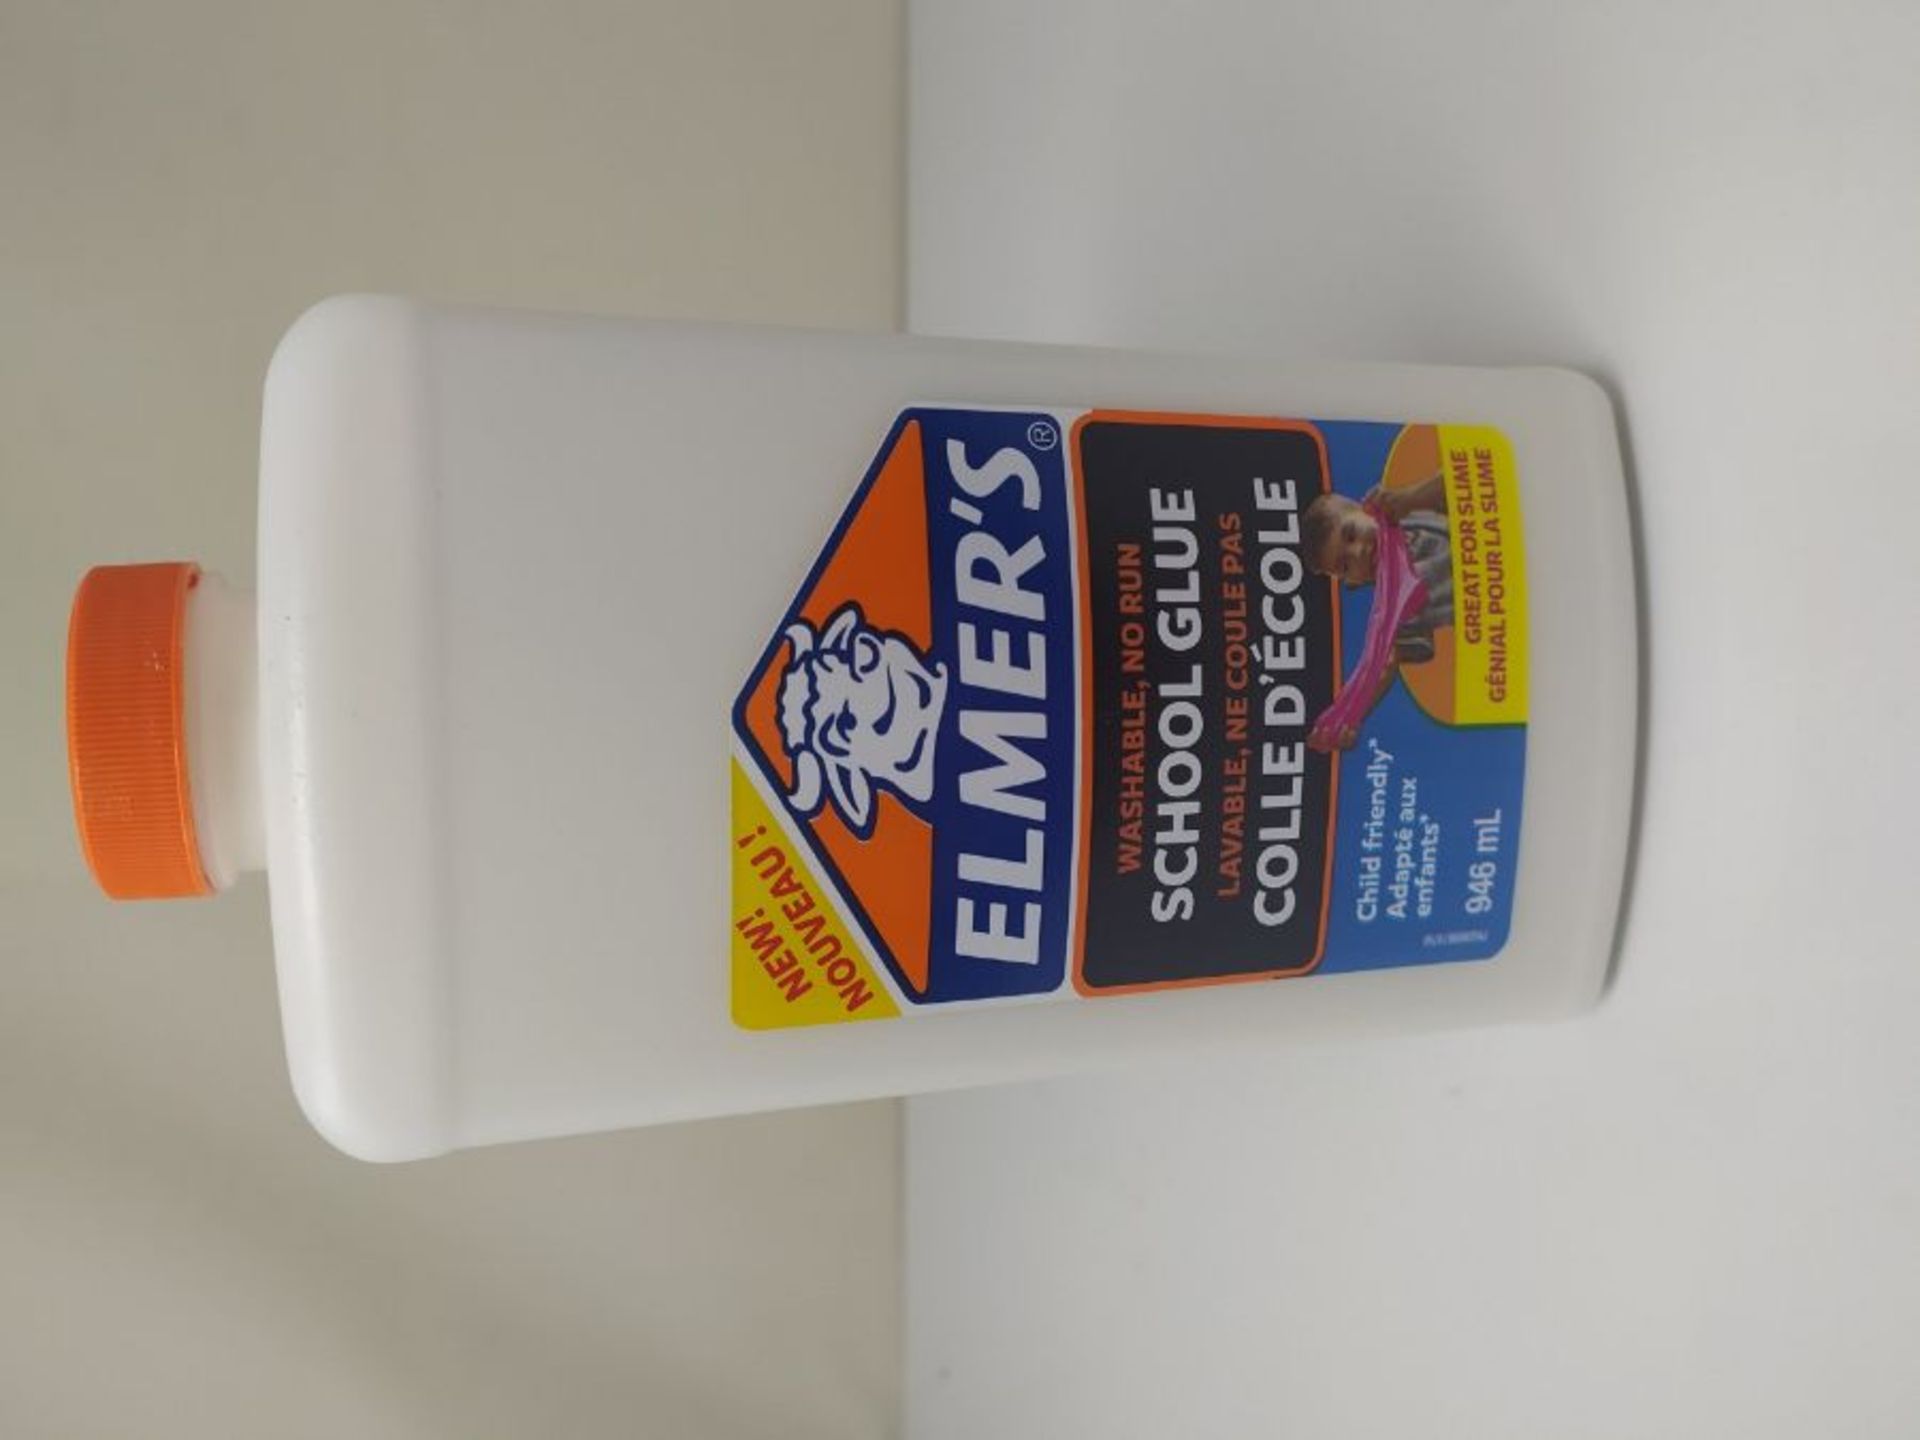 Elmer's White PVA Glue | 946 mL | Washable and Kid Friendly | Great for Making Slime a - Image 2 of 2